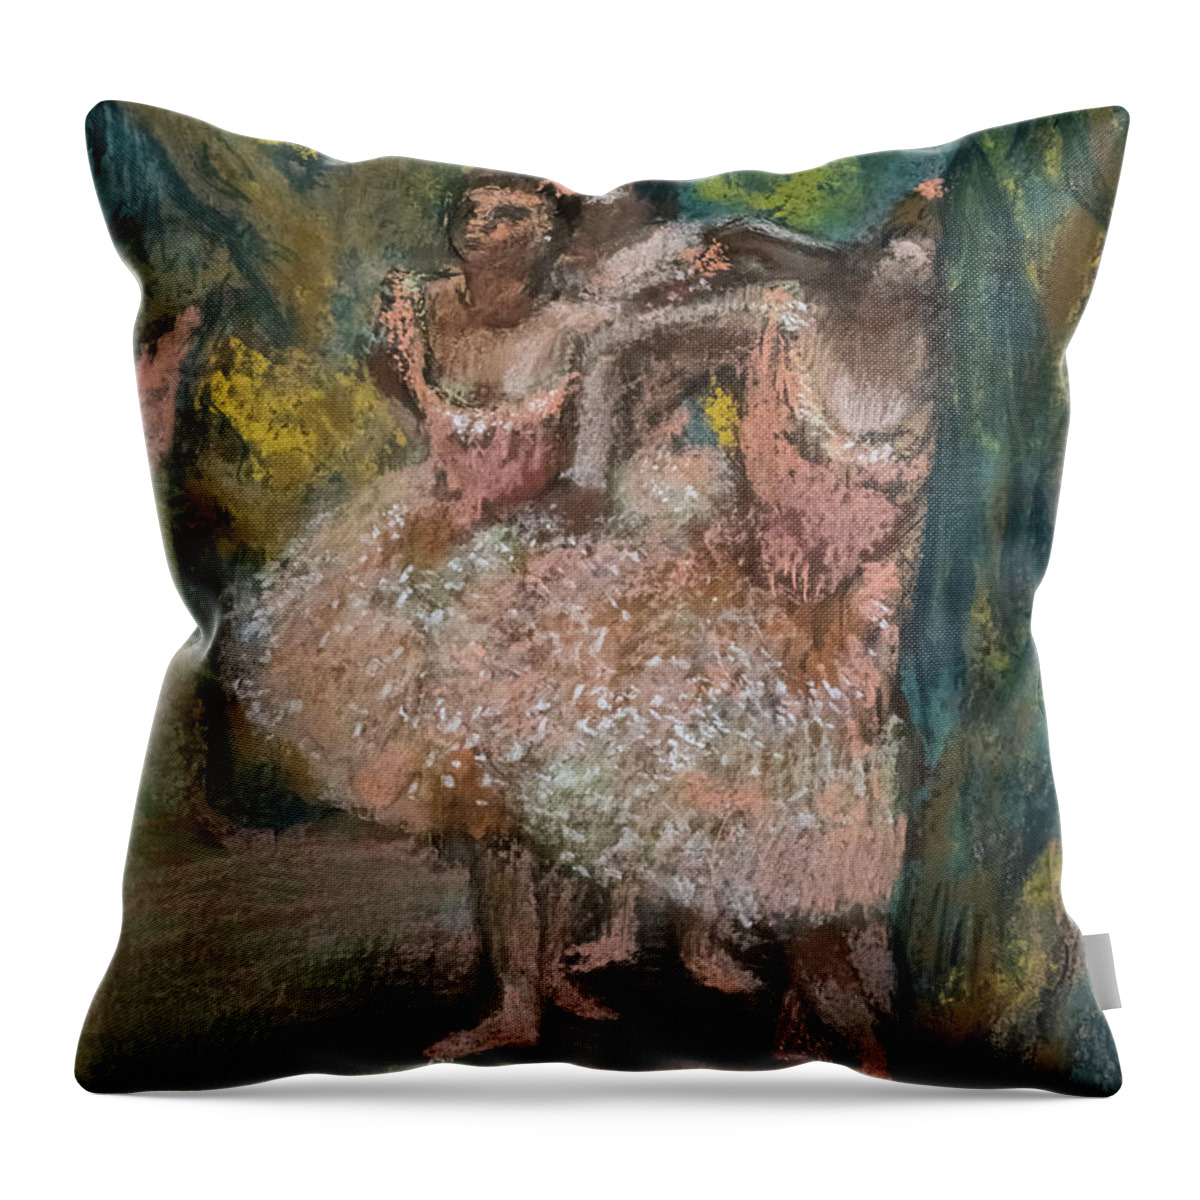 Dance Throw Pillow featuring the painting Three Dancers In Salmon Skirts by Edgar Degas